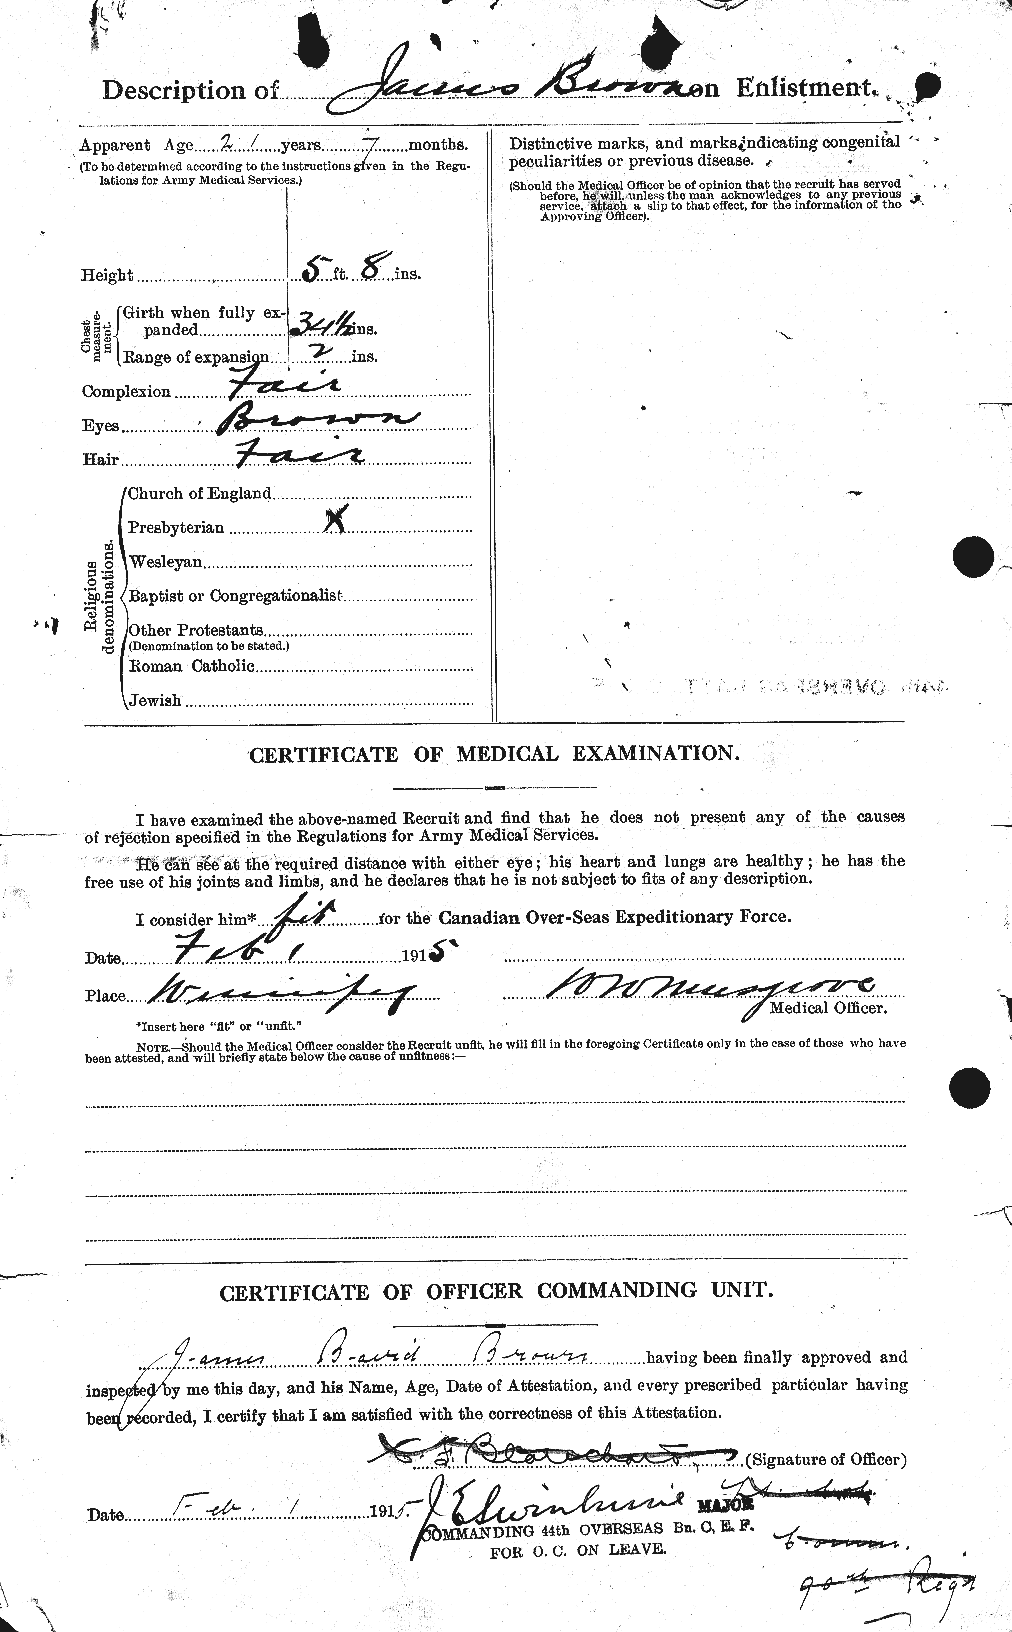 Personnel Records of the First World War - CEF 265797b